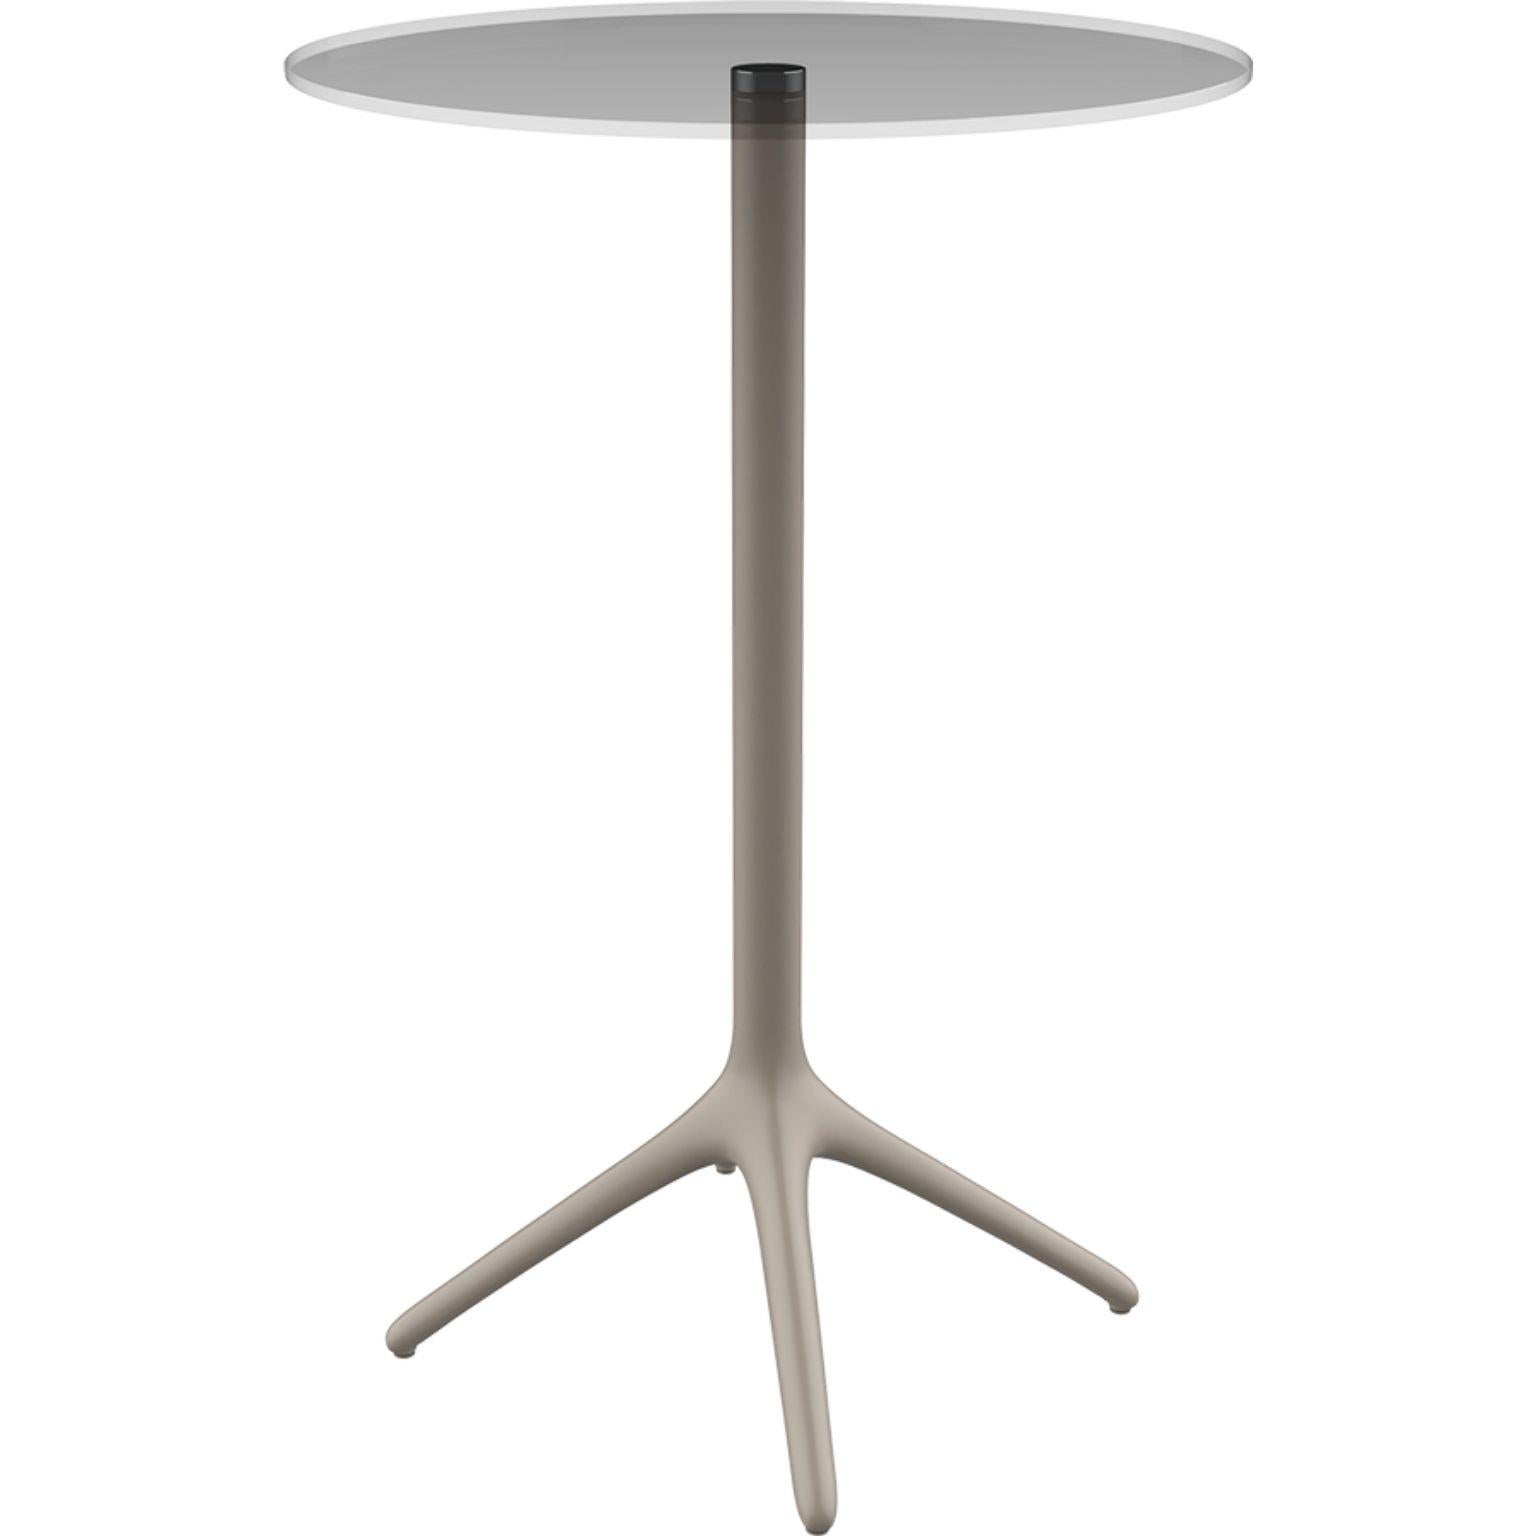 Uni cream table 105 by MOWEE
Dimensions: D 45.5 x H 105 cm
Material: Aluminium, tempered glass
Weight: 6.2 kg
Also available in different colours and finishes. Collapsable version available.

A table designed to be as versatile as possible and